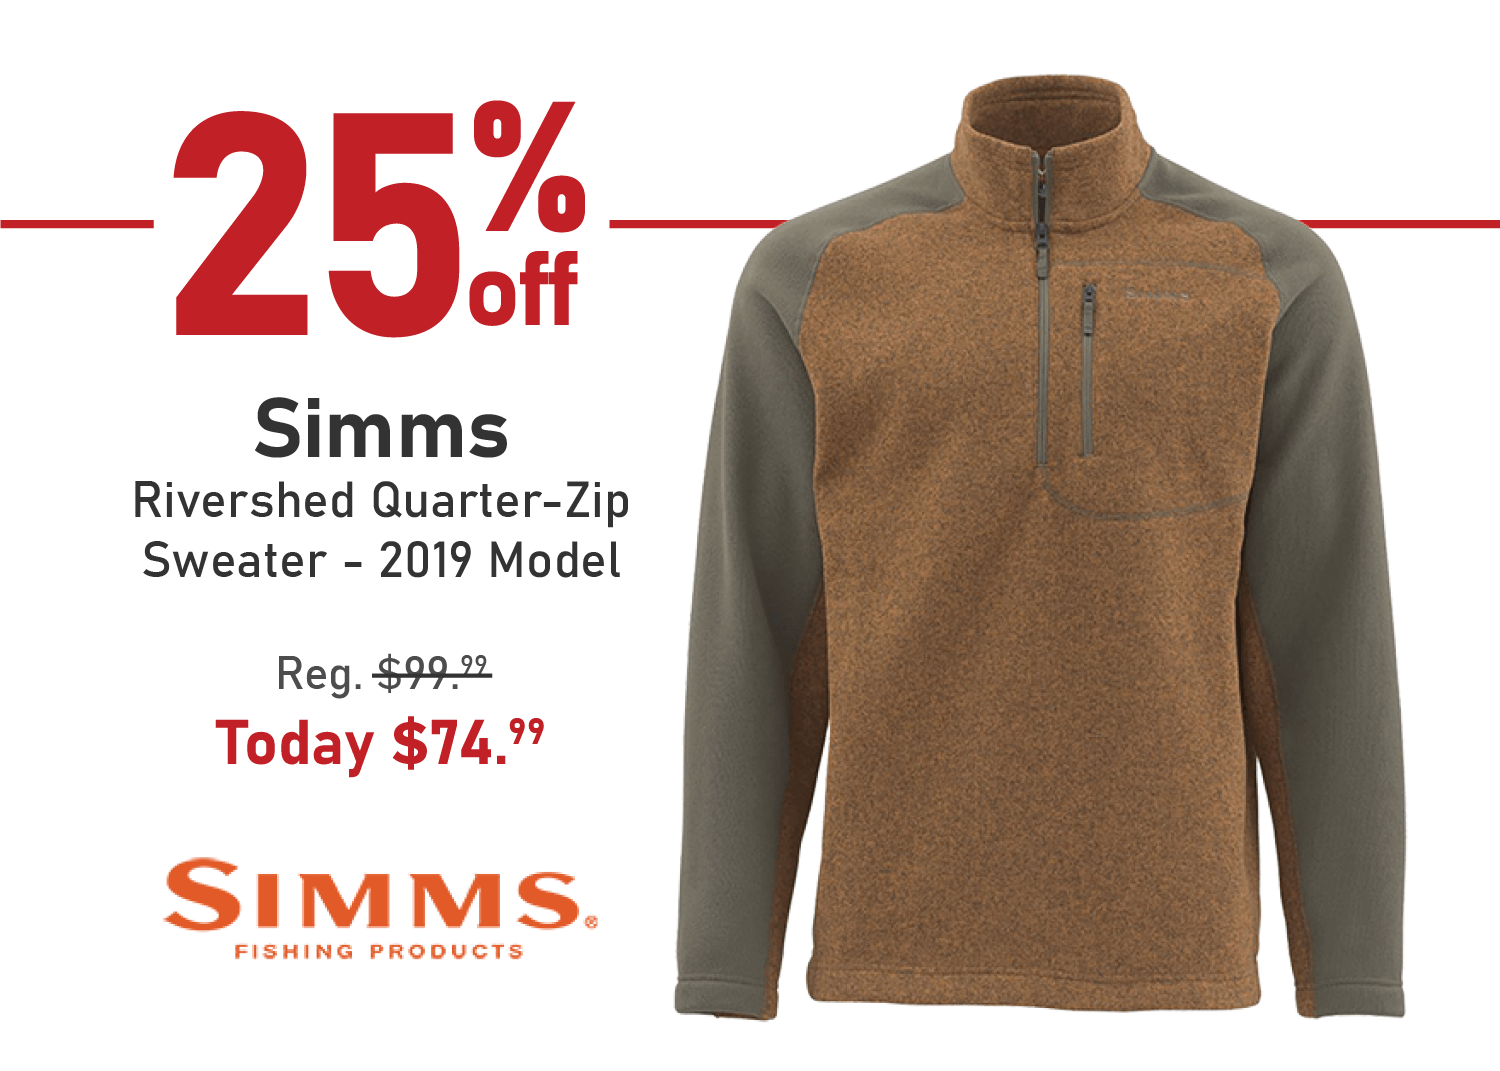 Save 25% on the Simms Rivershed Quarter-Zip Sweater - 2019 Model